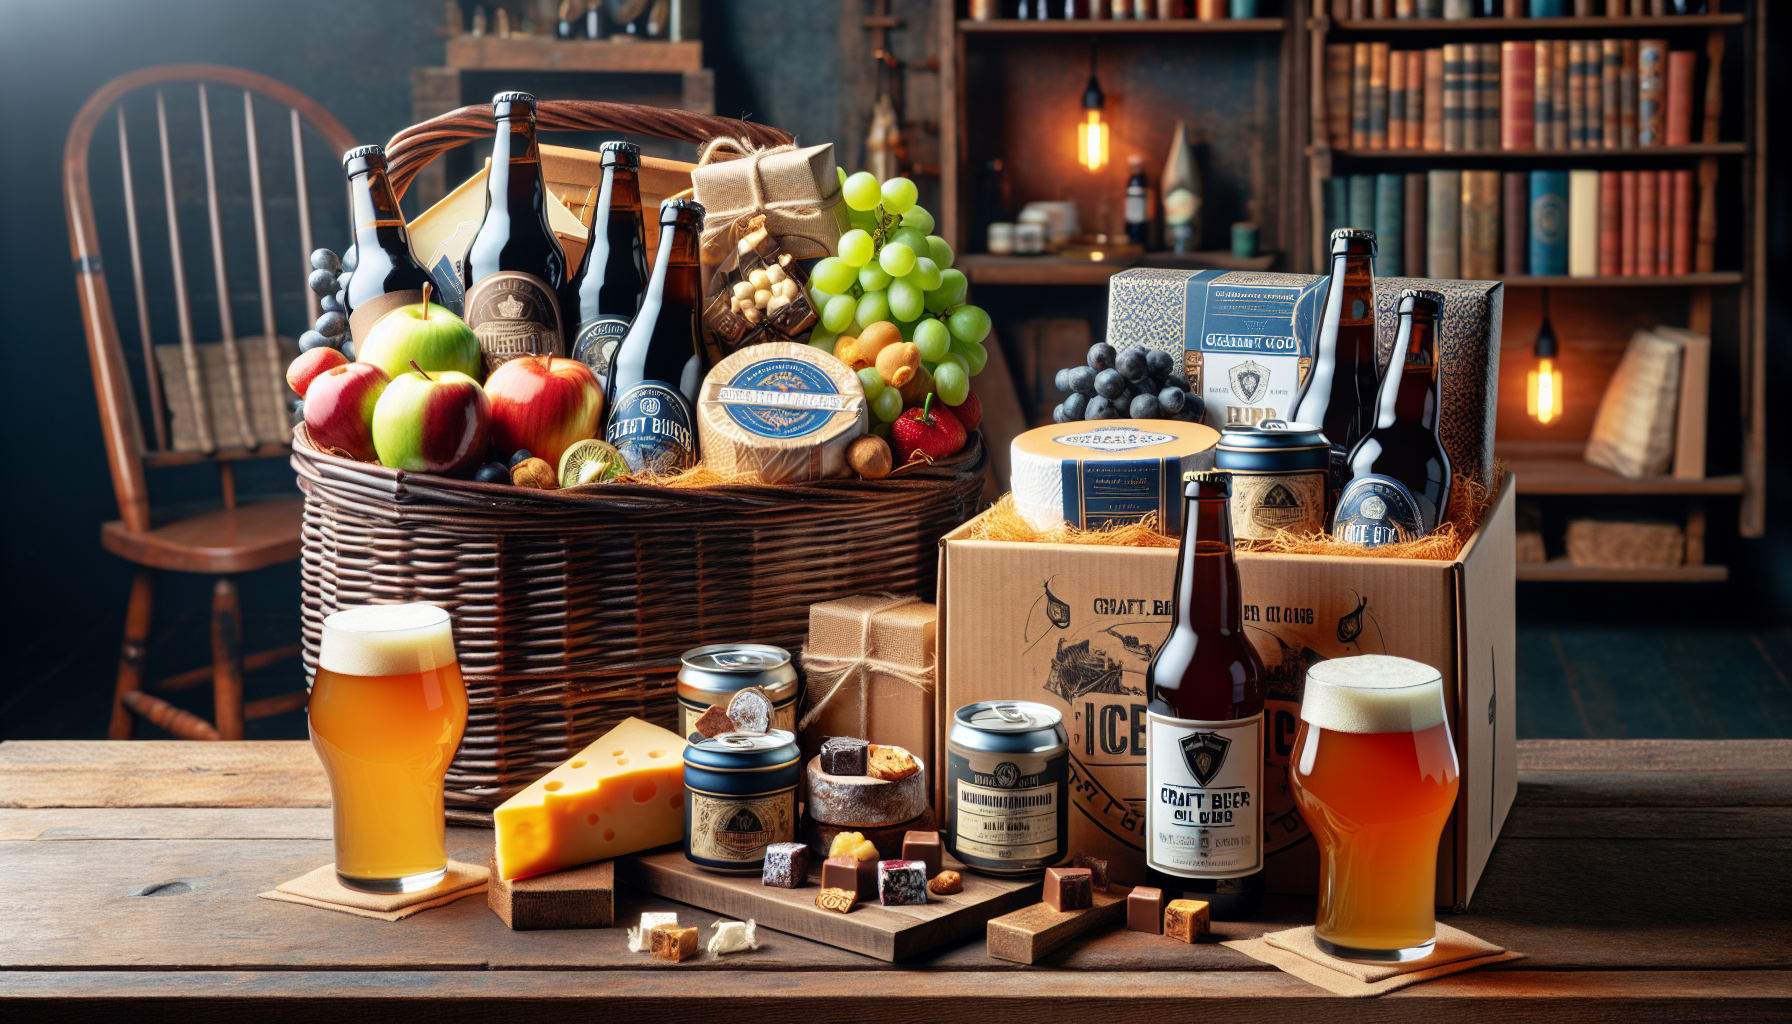 Gourmet food subscriptions and Craft Beer Club subscriptions